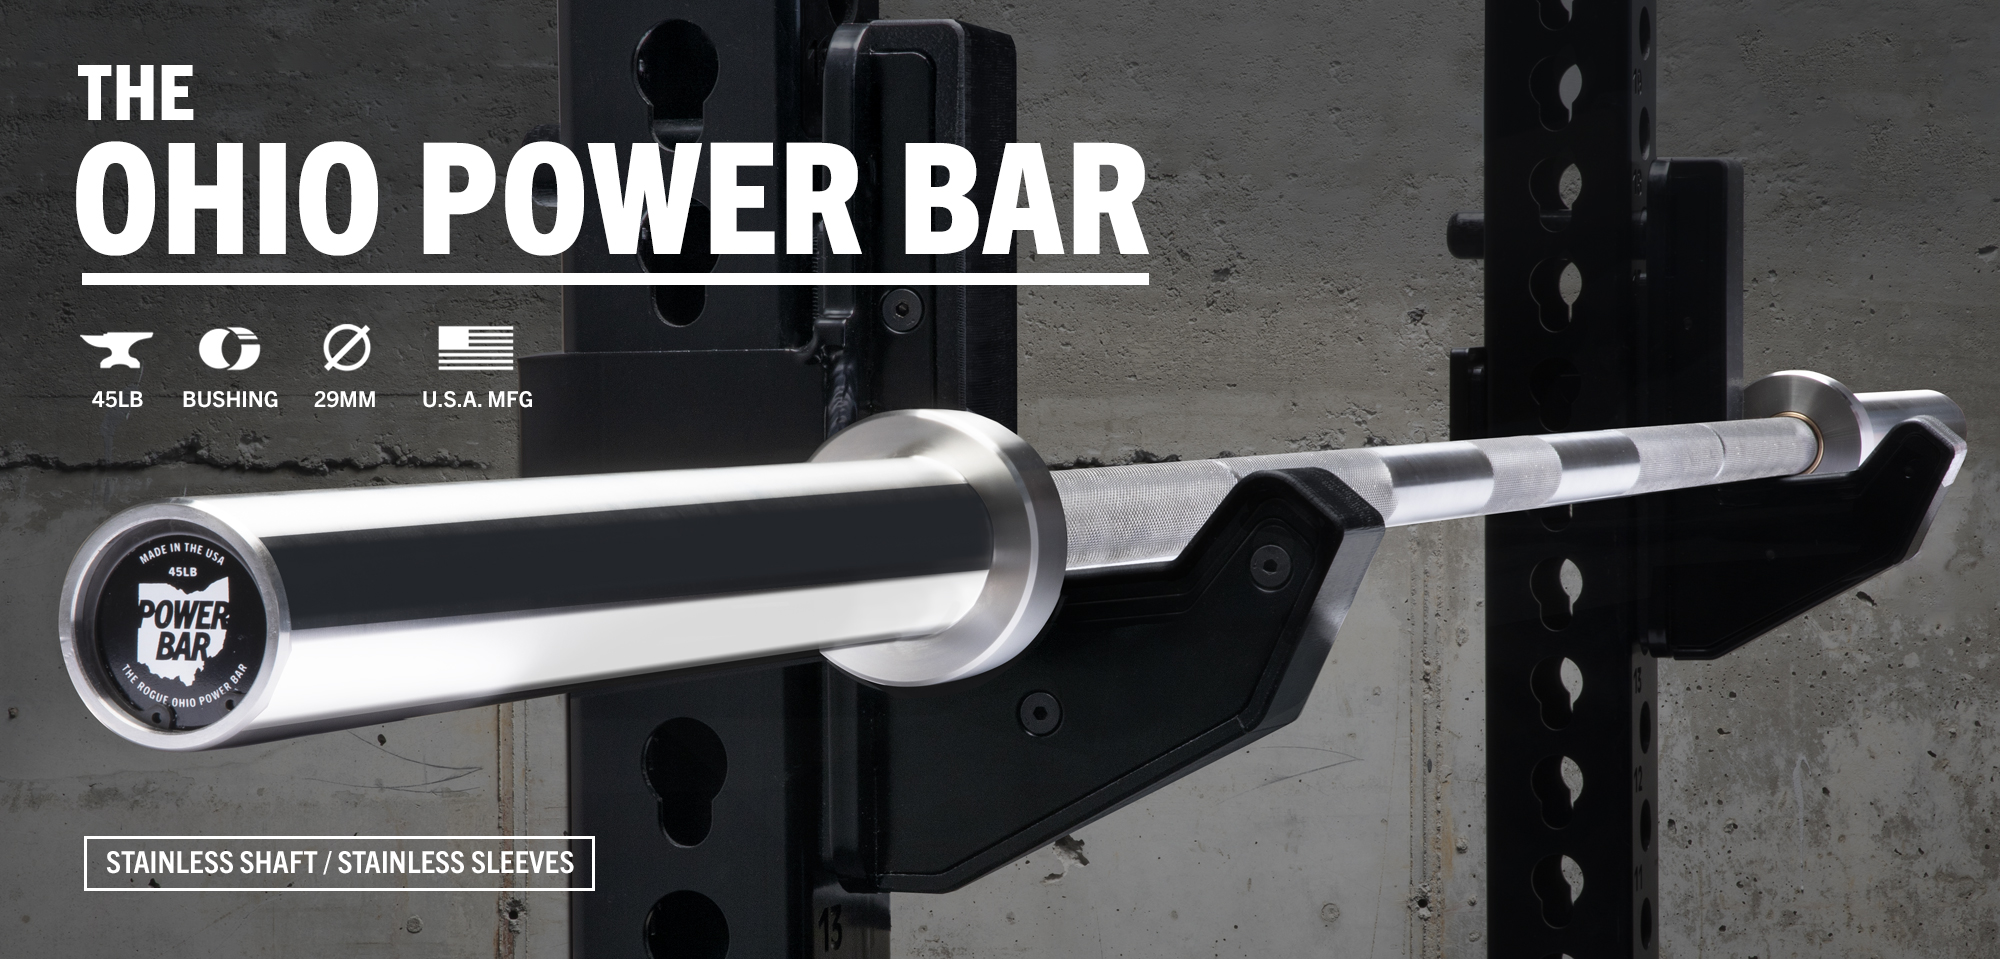 Rogue 45LB Ohio Power Bar - Stainless/Stainless | Rogue Fitness Rogue Ohio Power Bar Stainless Steel